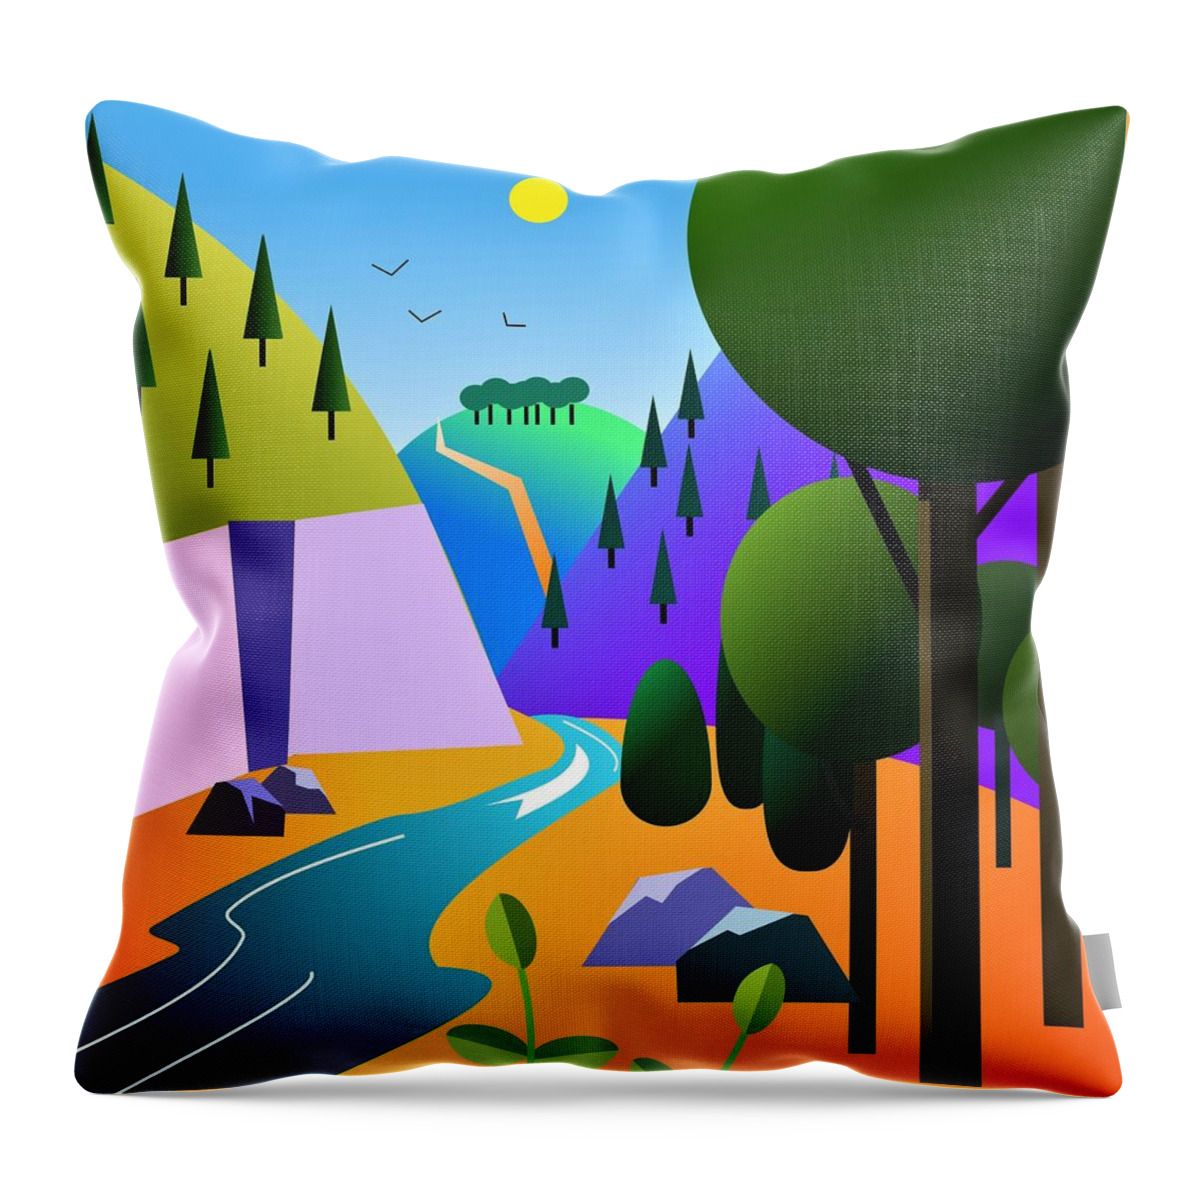 River Throw Pillow featuring the digital art River valley by Fatline Graphic Art